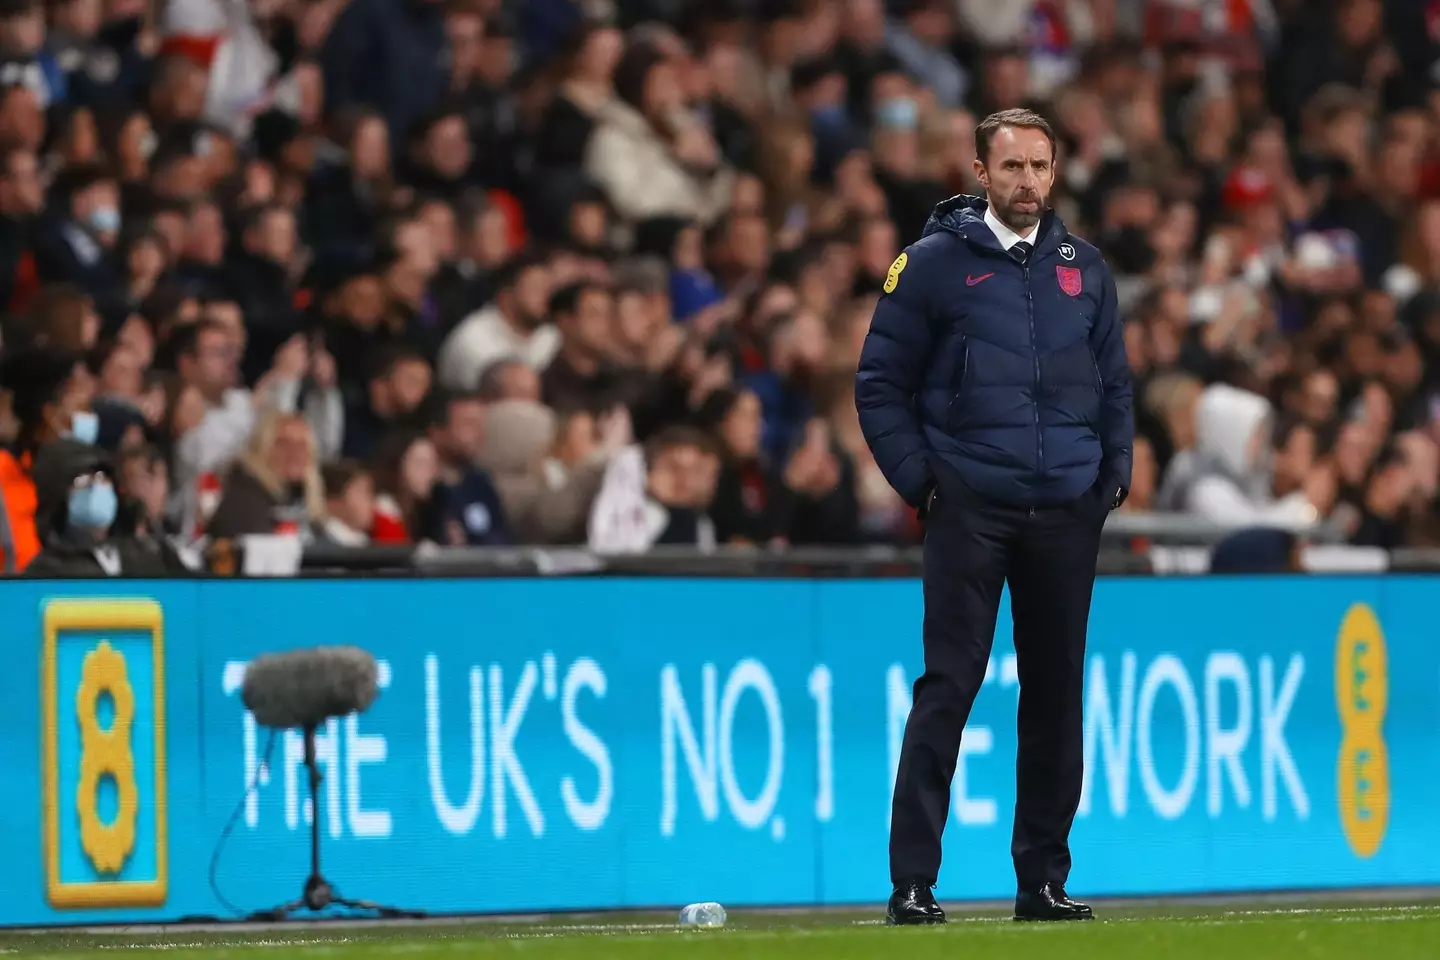 England manager Gareth Southgate saw his side kick off their World Cup campaign with a superb win over Iran.